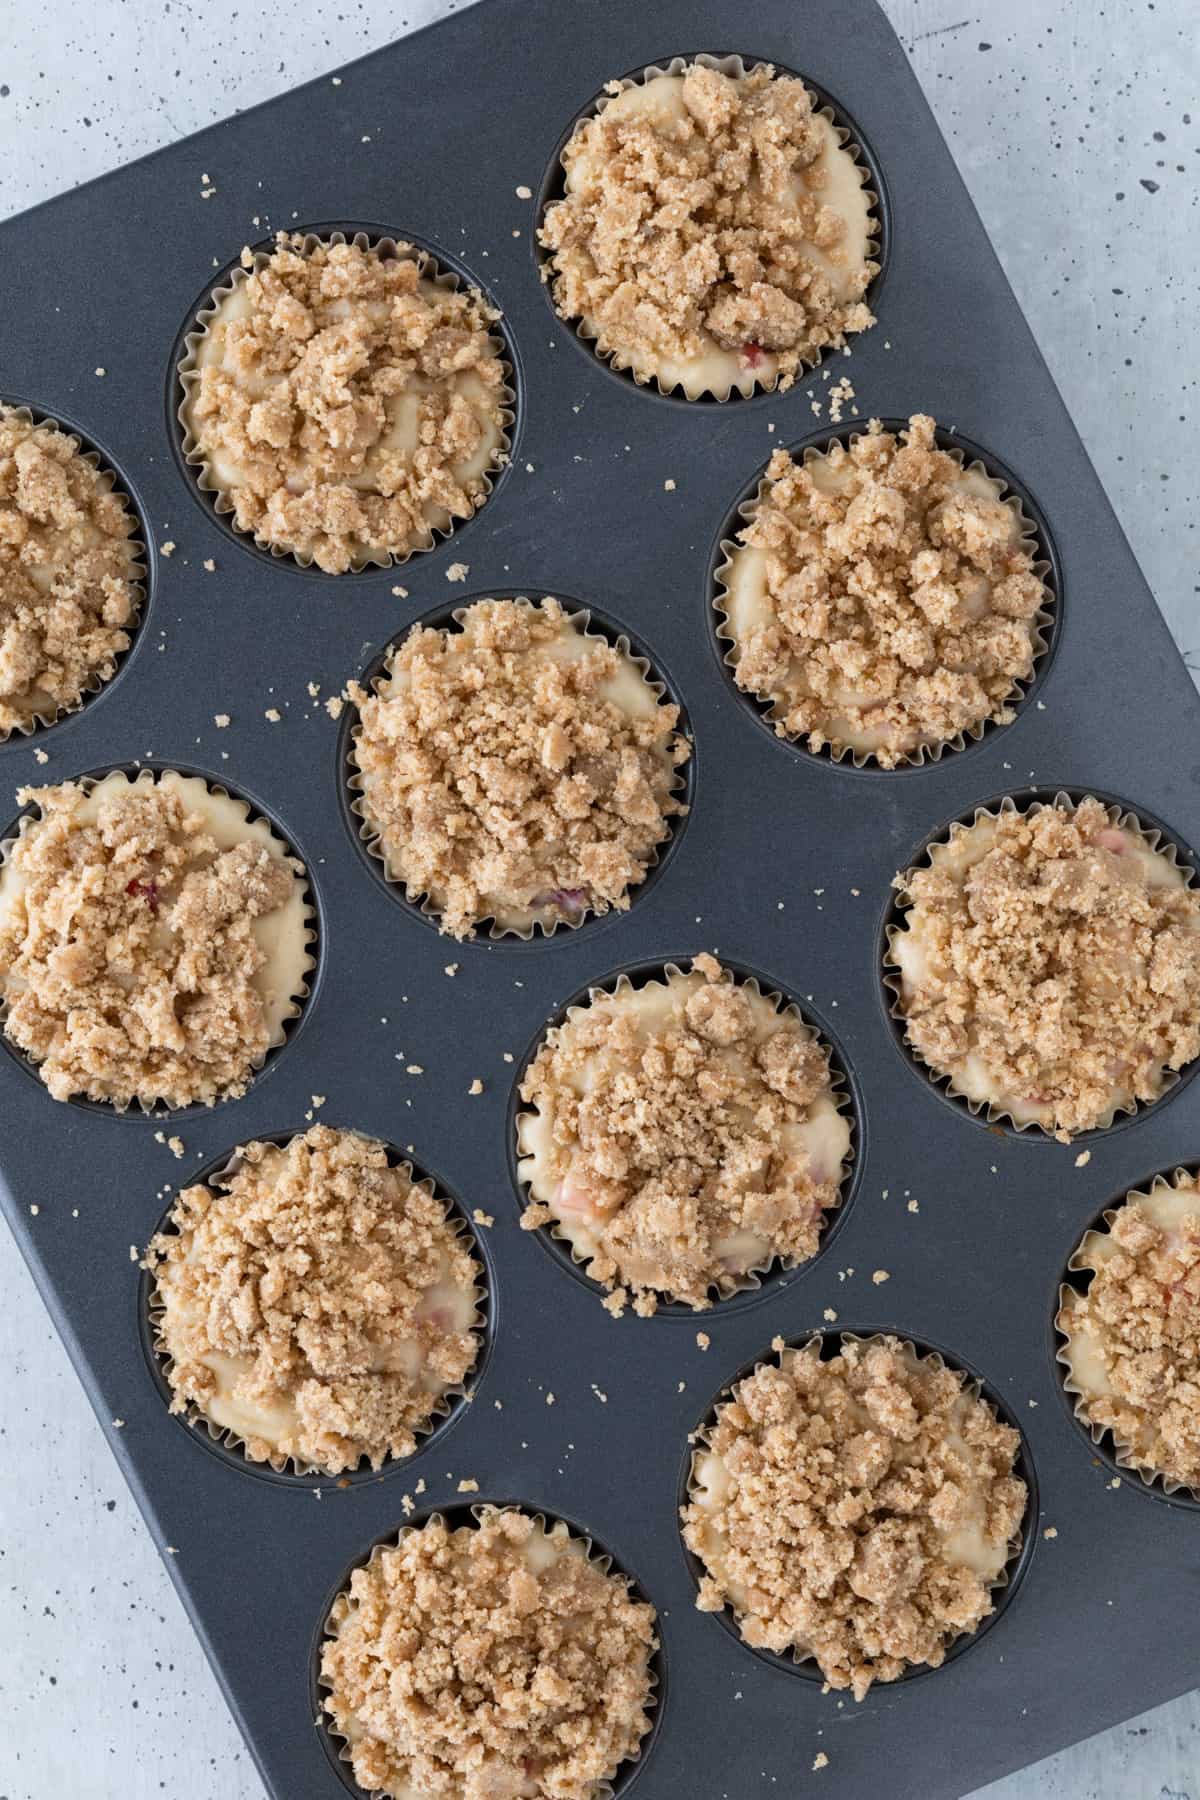 Streusel-covered unbaked muffins in a muffin pan.